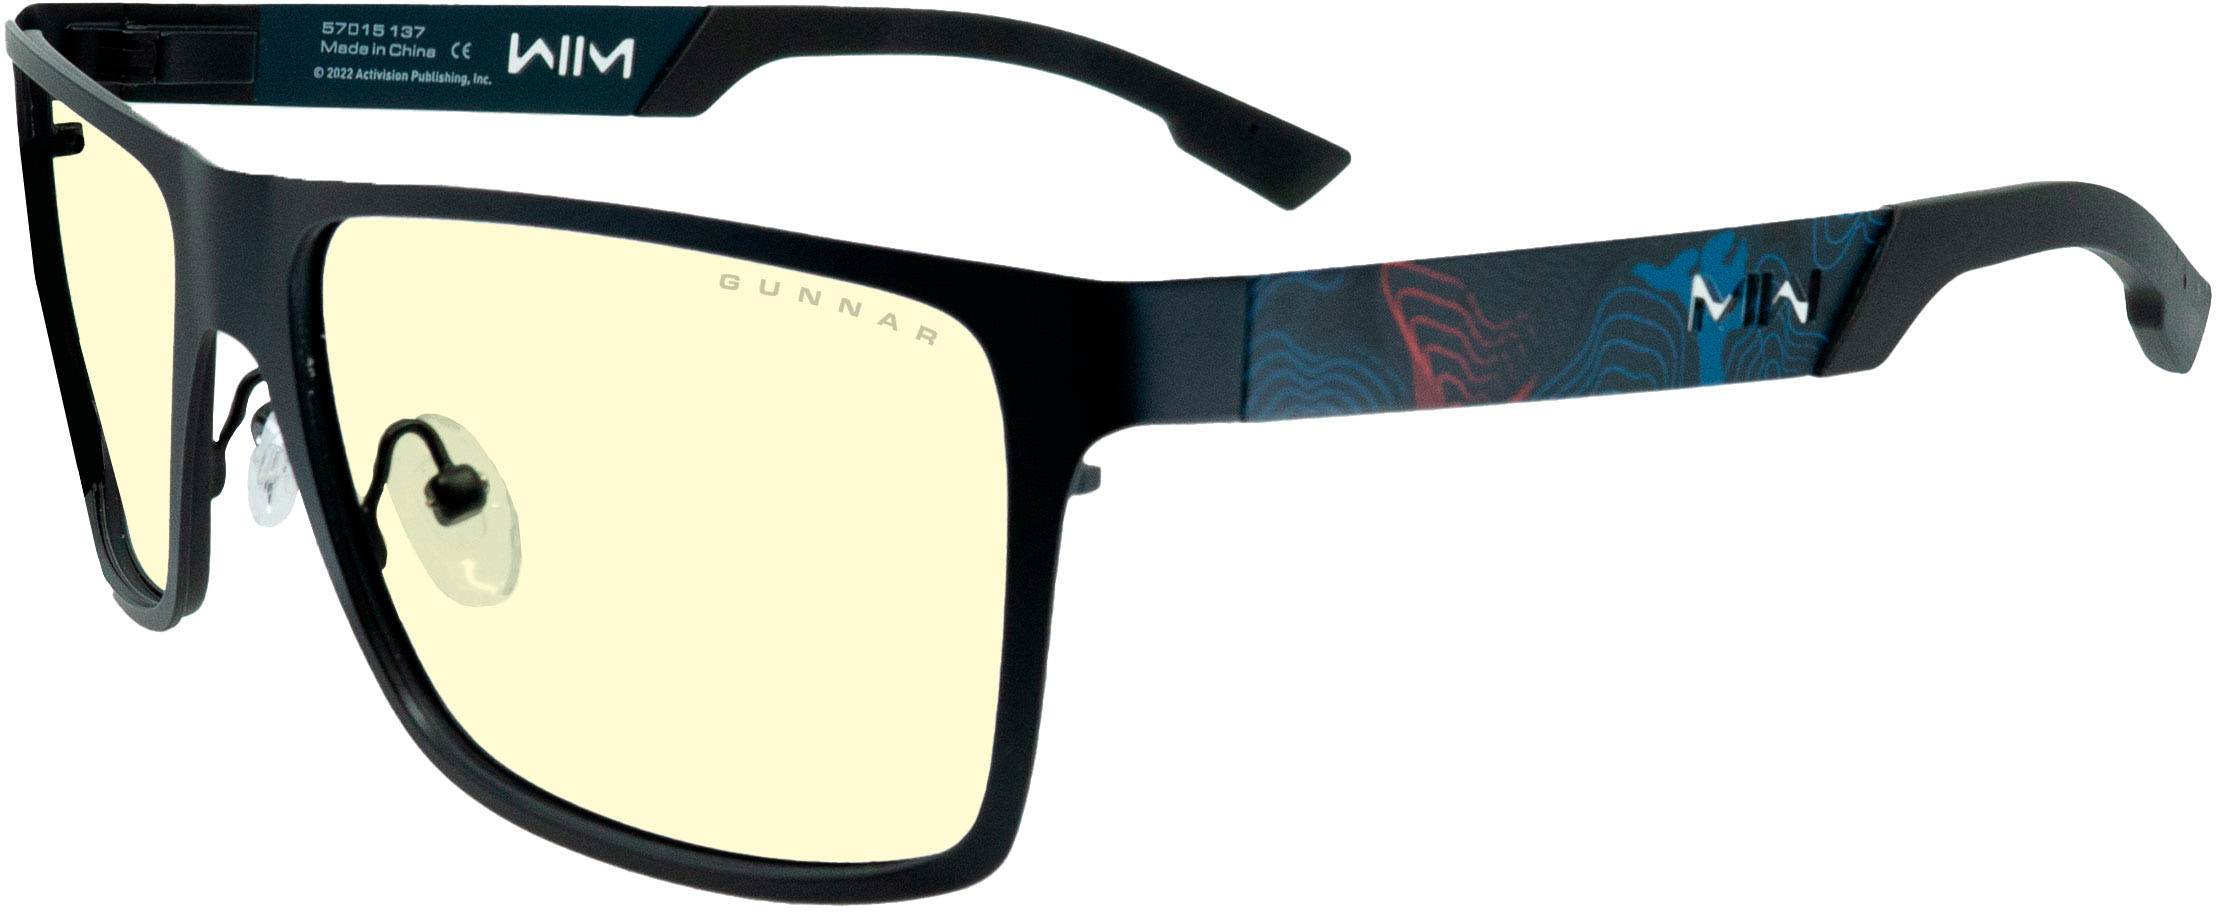 Angle View: GUNNAR - Blue Light Gaming & Computer Glasses - Call of Duty - Onyx